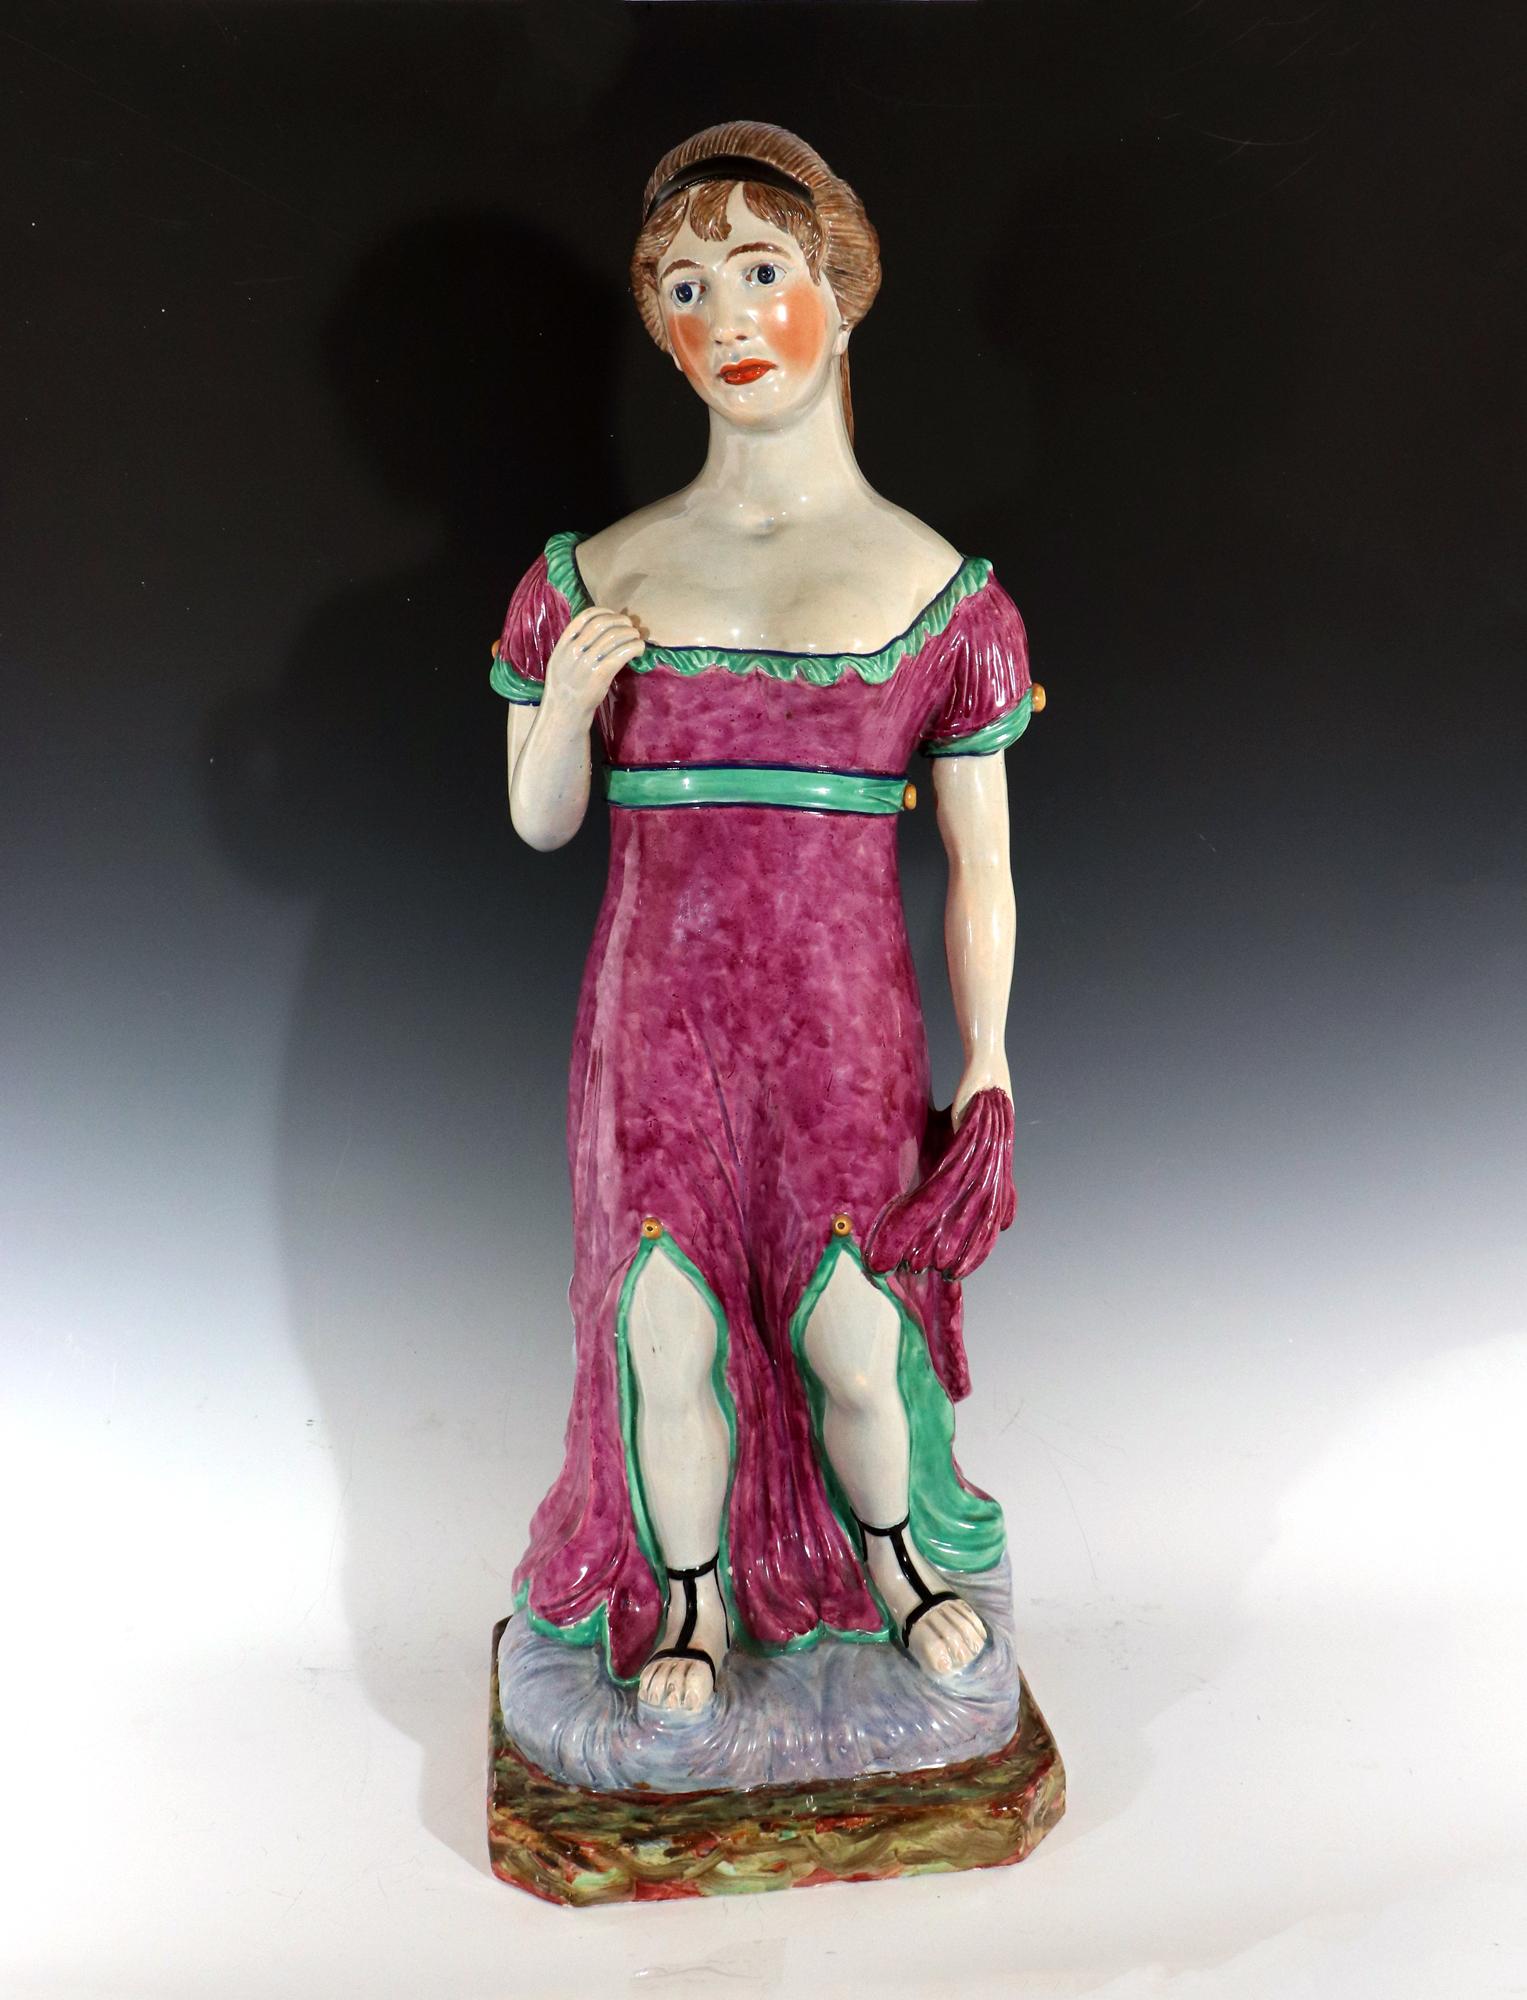 Massive Staffordshire Pearlware Pottery Figure of Venus,
circa 1810

The extremely large figure depicts Venus, Aphrodite of the Classical Greek legend. This model is of great rarity. Venus, is superbly painted, depicted in purple robes with green